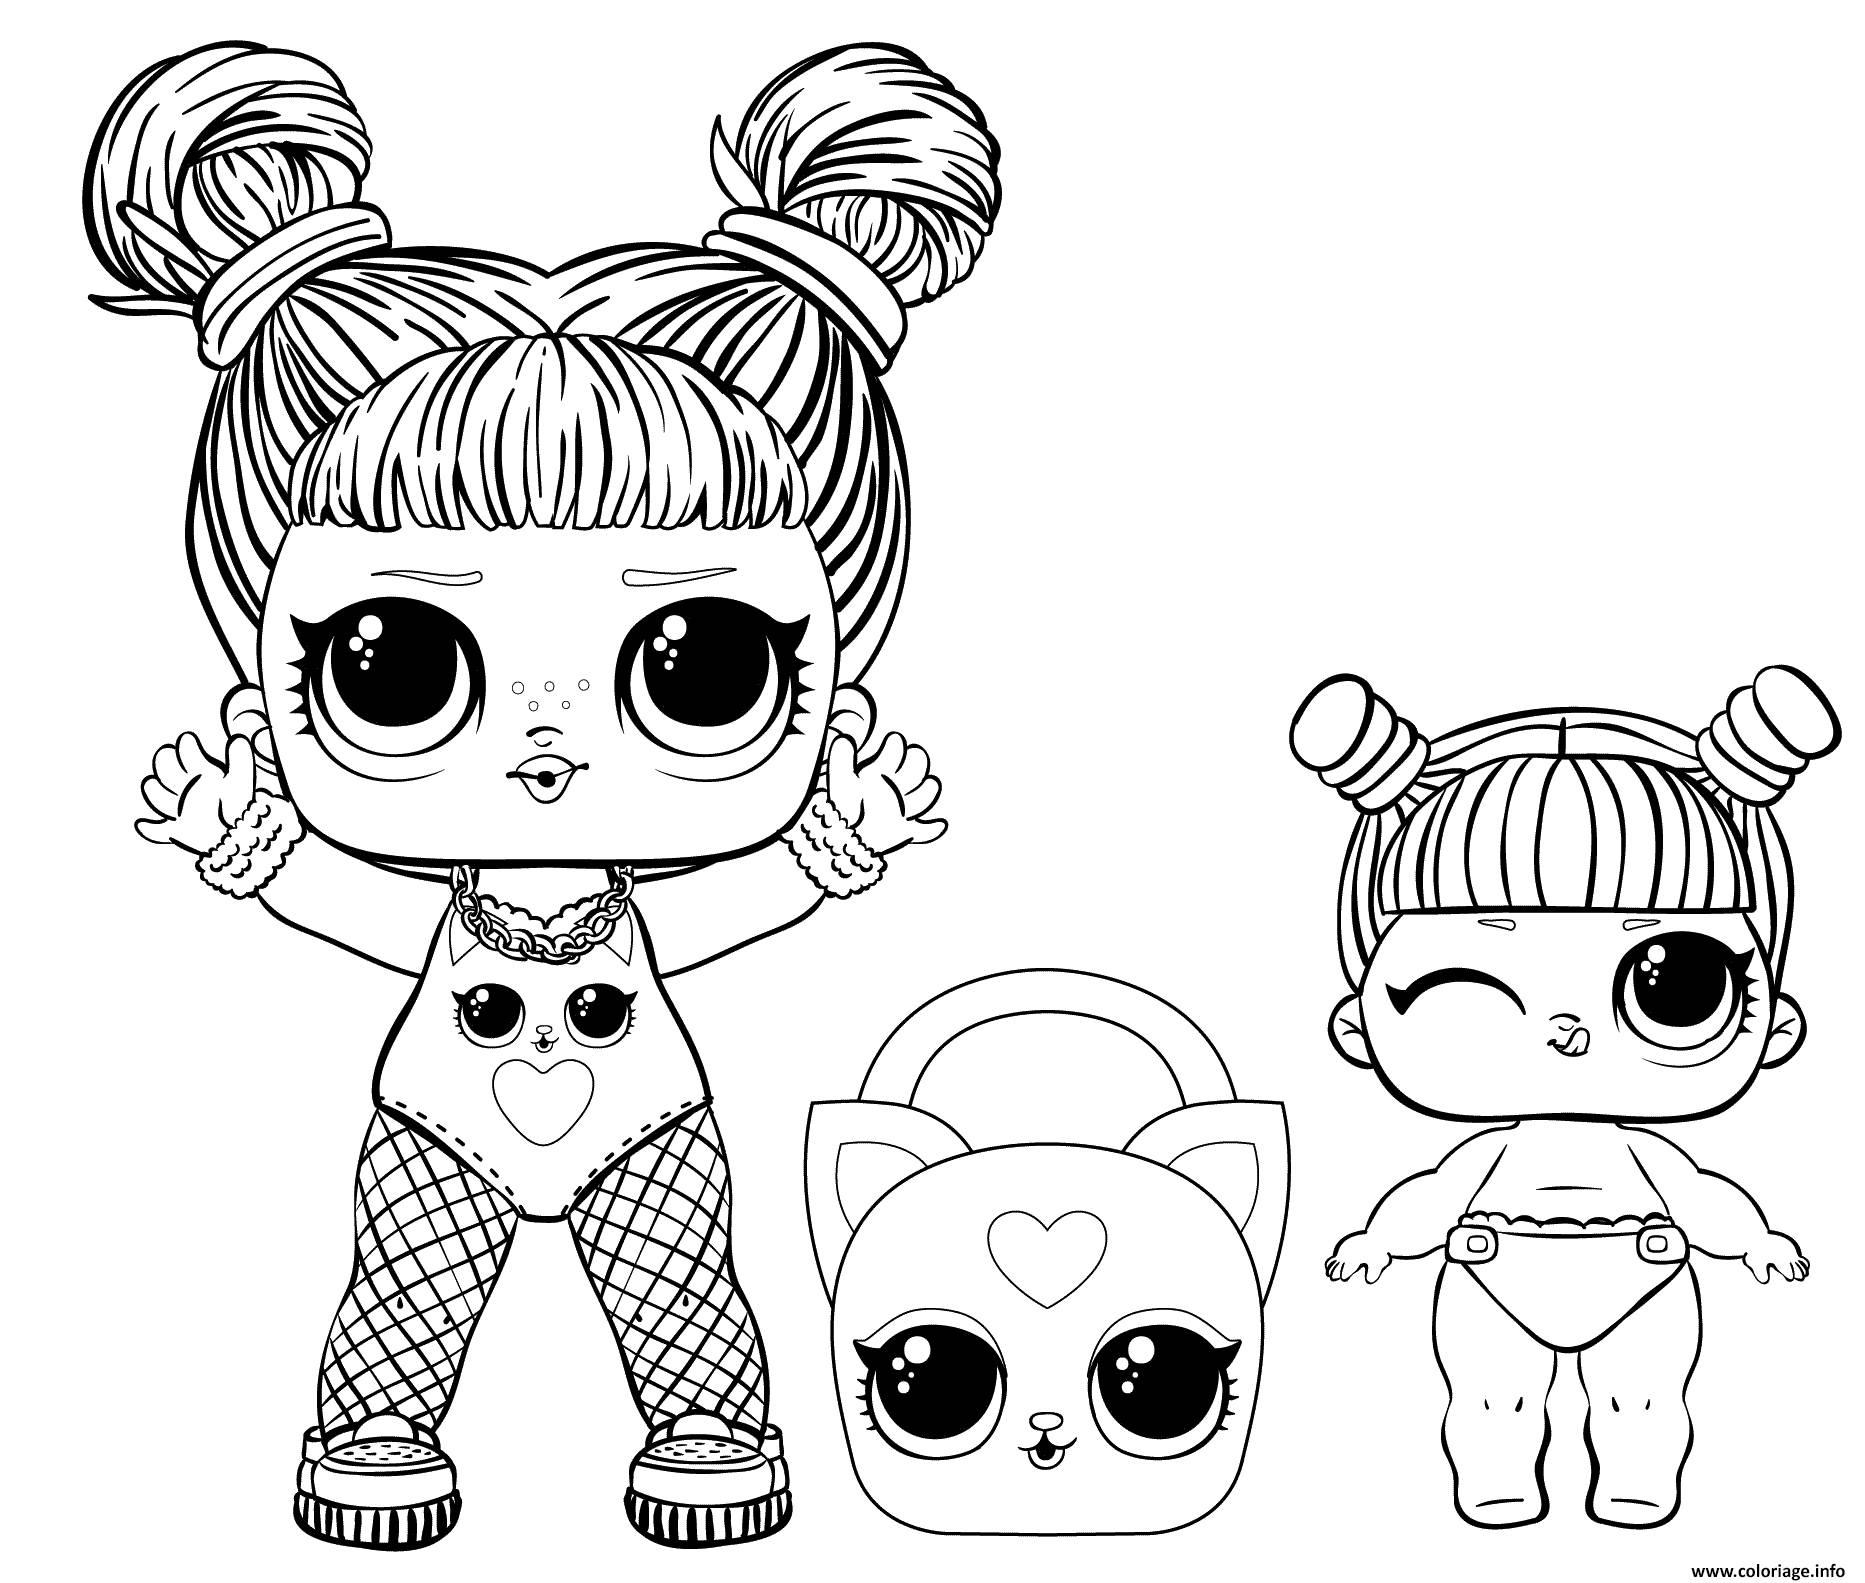 Outstanding lol doll coloring book for kids